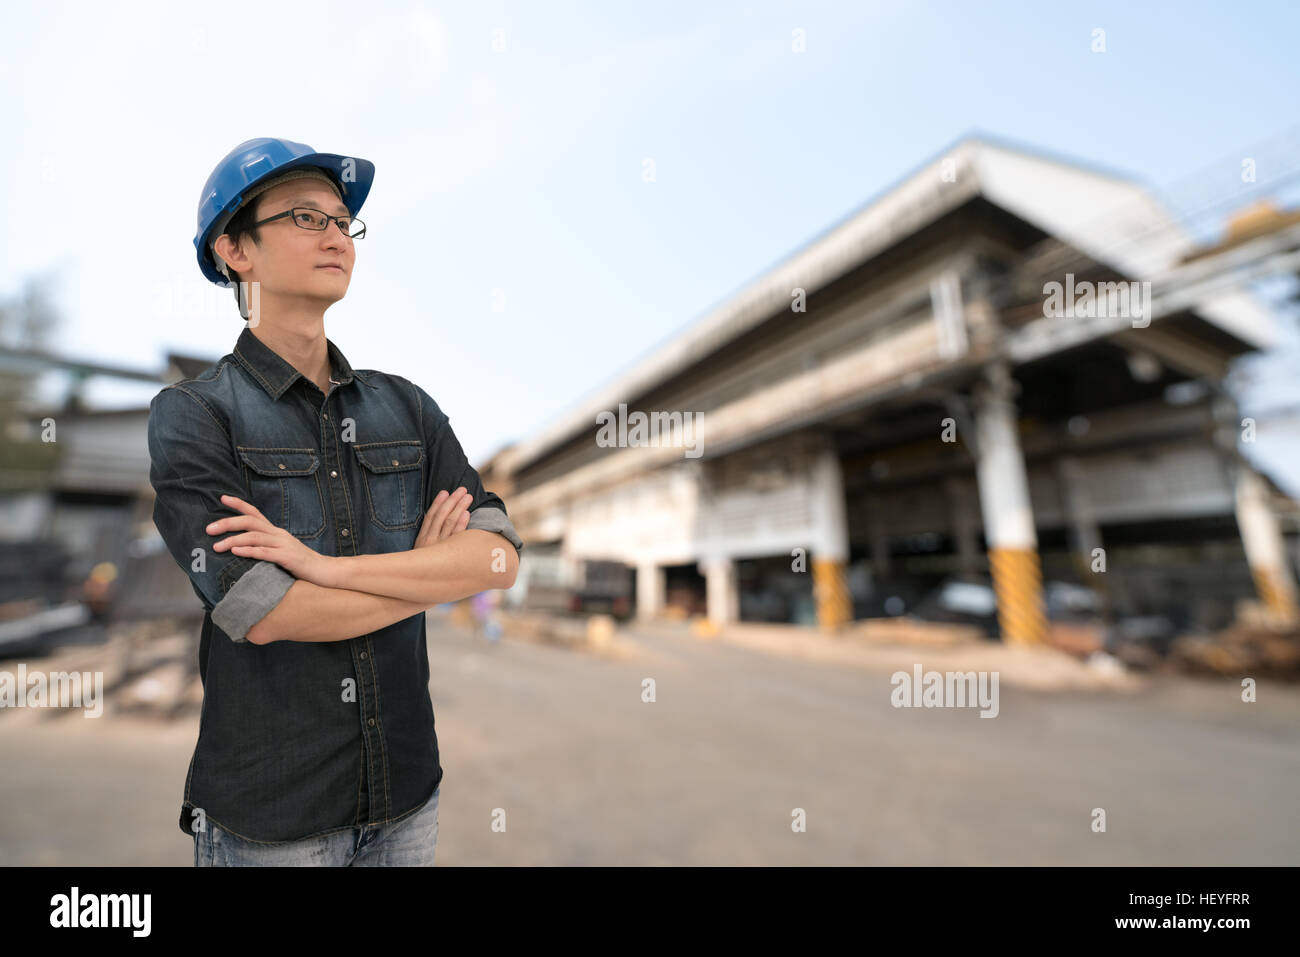 Asian engineer or technician looking upward, with clipping path, blur factory background, industry or engineering concept, young and handsome Stock Photo